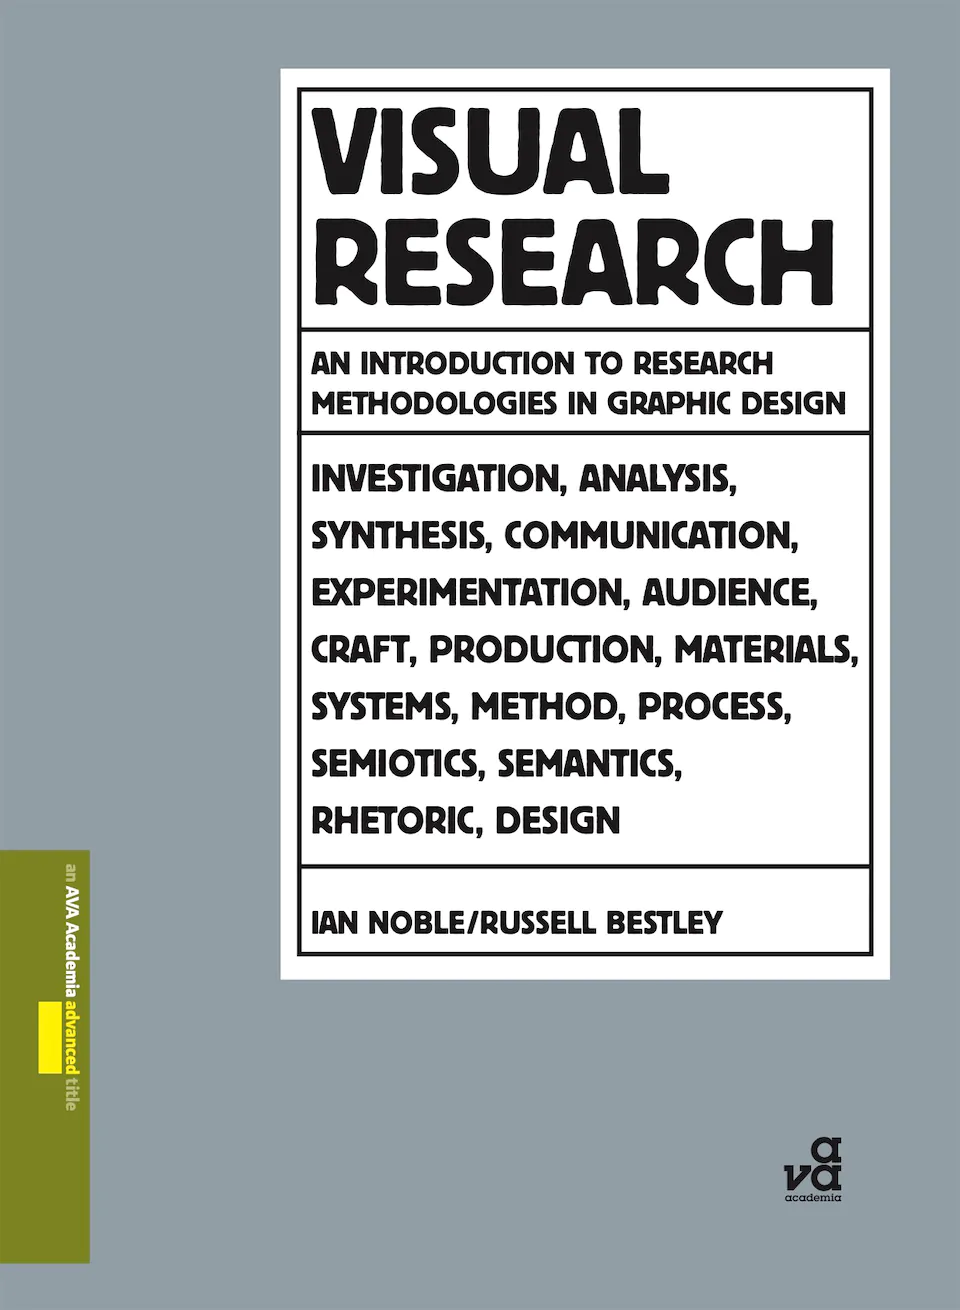 Visual Research: An Introduction to Research Methodologies in Graphic Design by Ian Noble, Russell Bestley finished on 2023 July 4